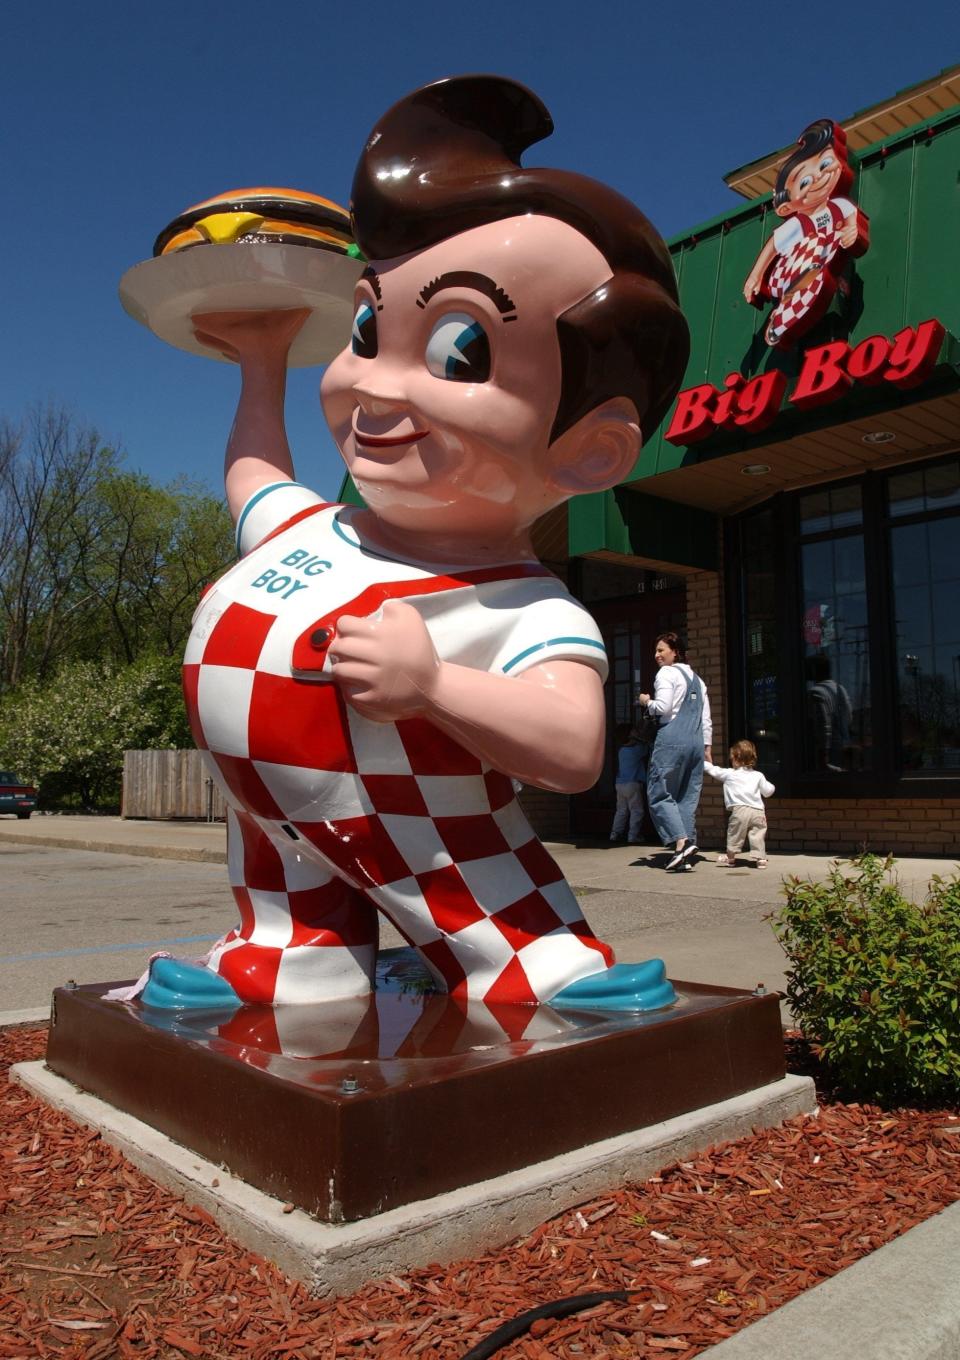 A Big Boy statue is located near the entrance to the Big Boy restaurant on Ford Road in Canton.